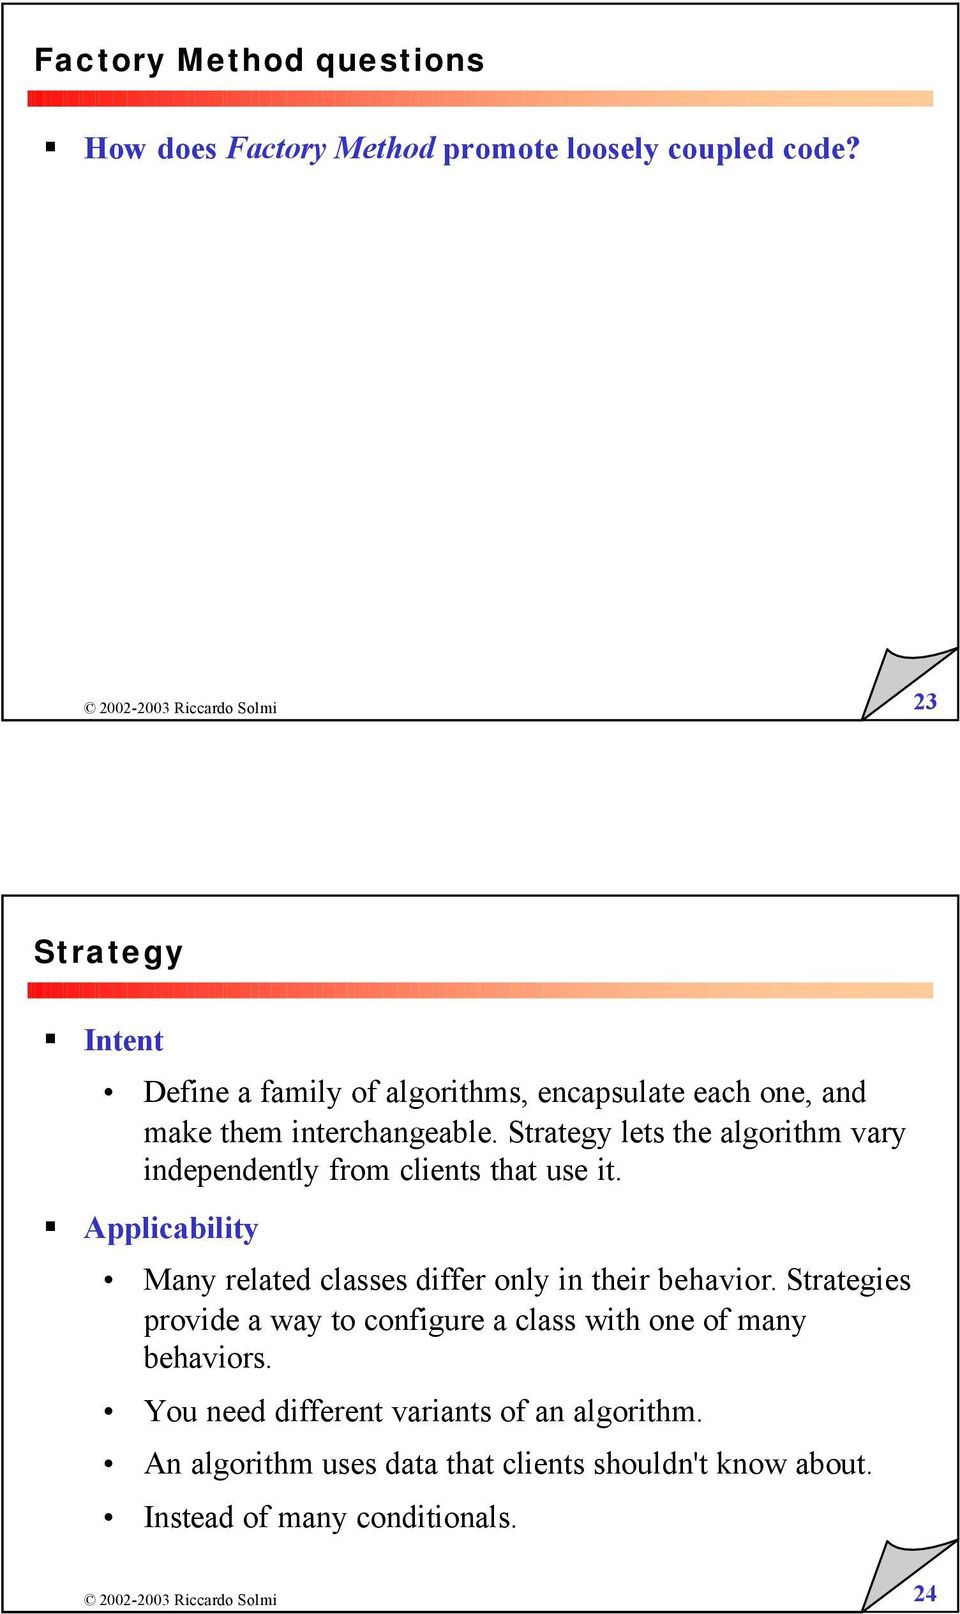 Strategy lets the algorithm vary independently from clients that use it.